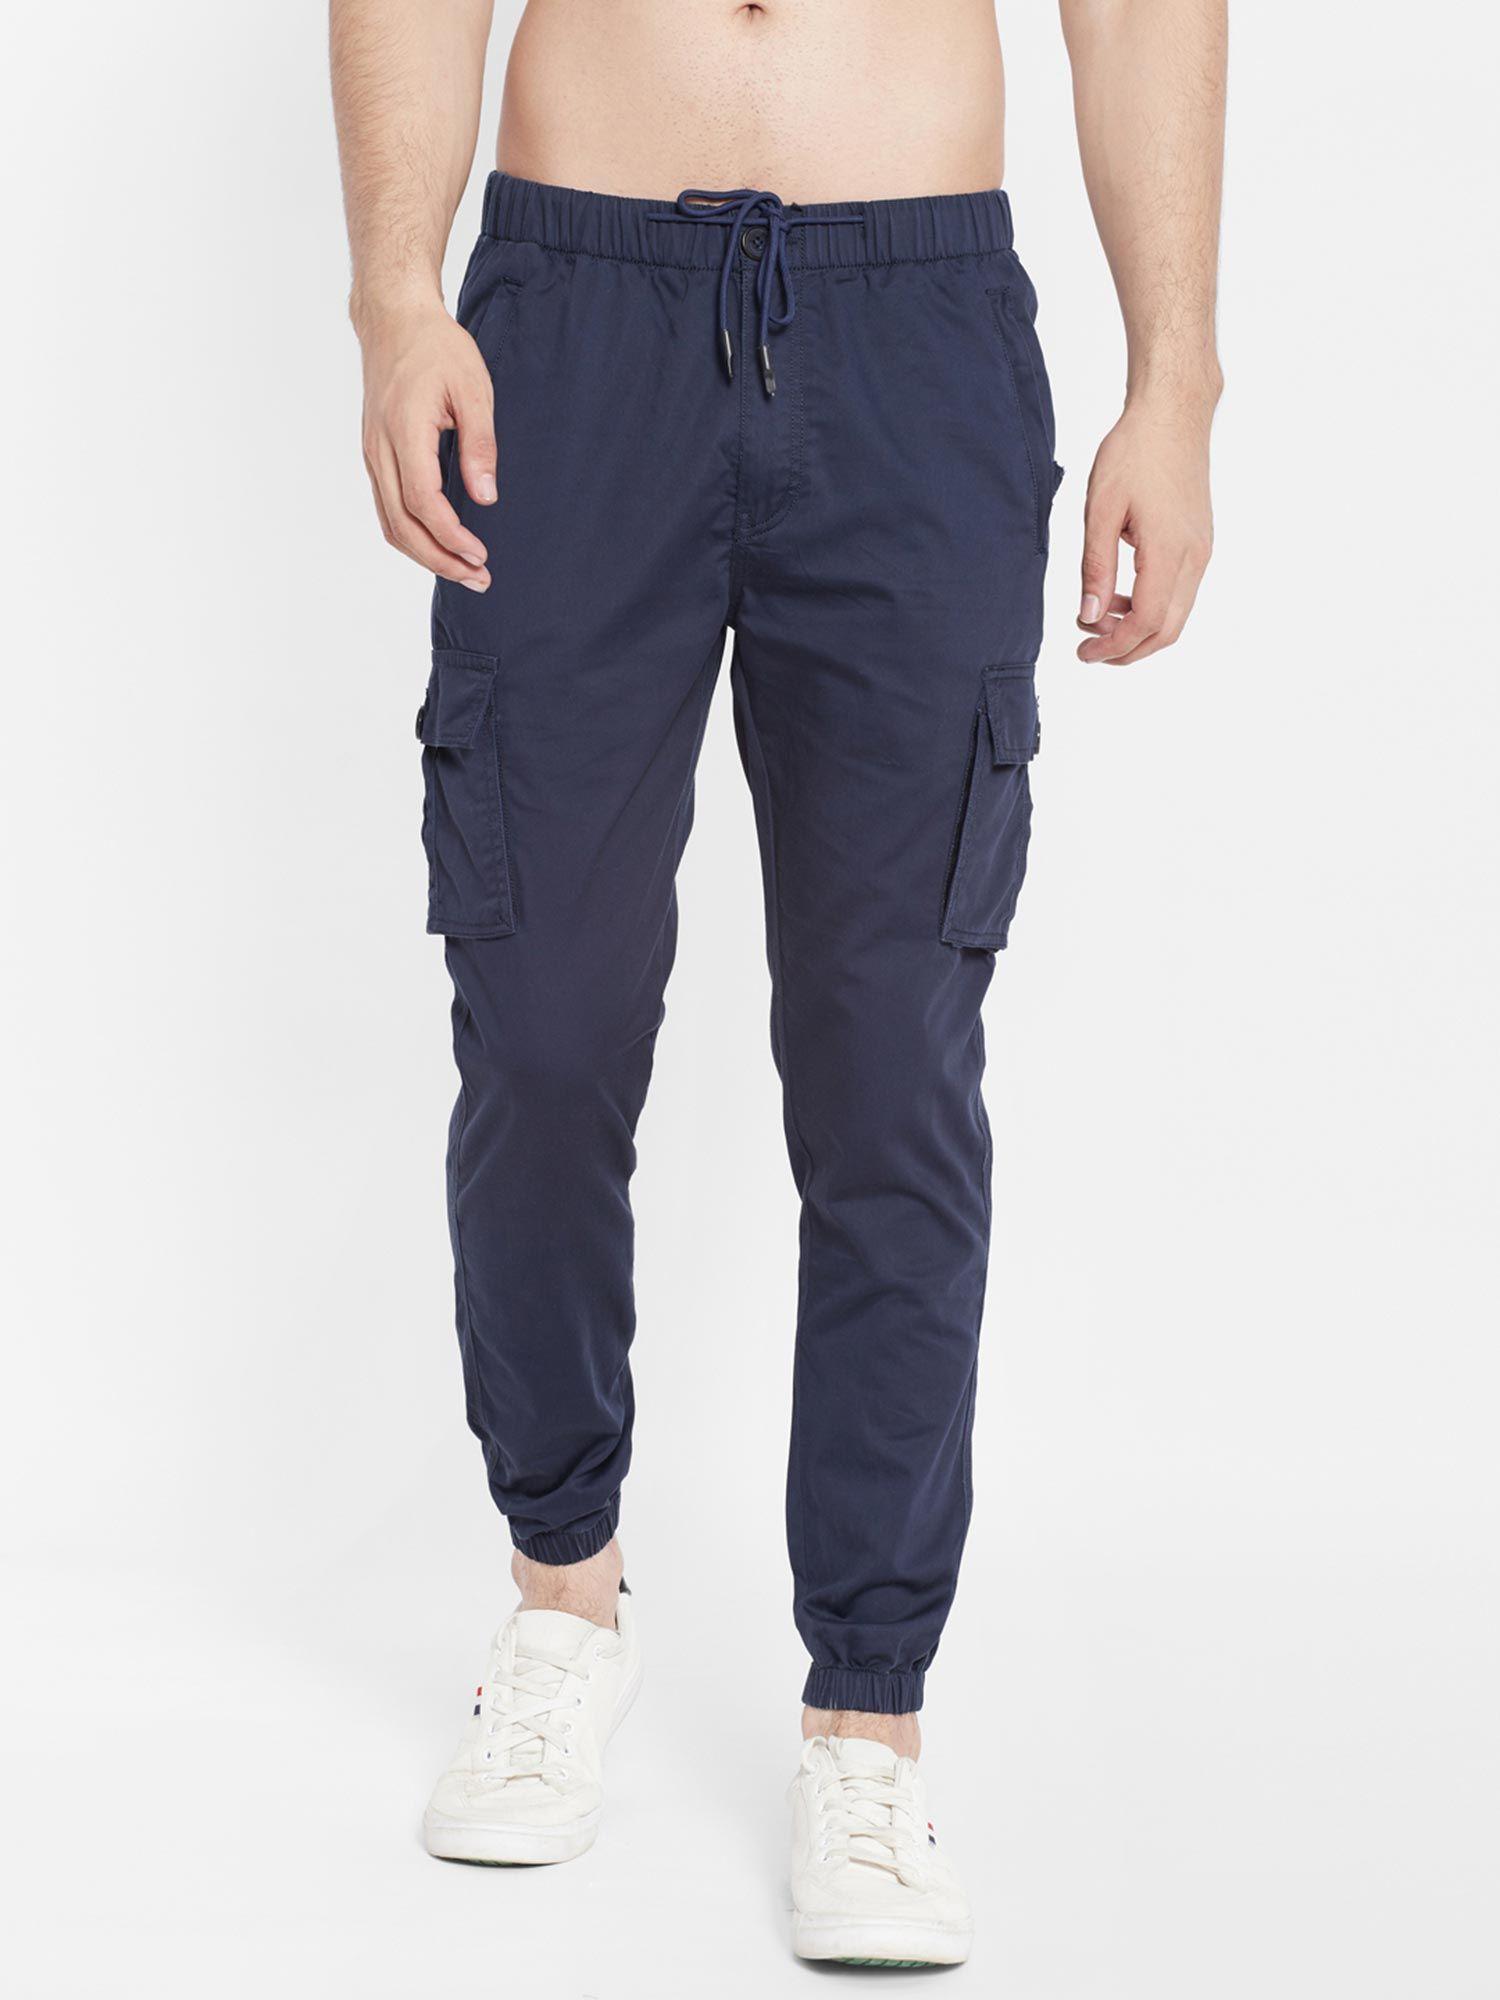 mens navy blue pure cotton solid joggers